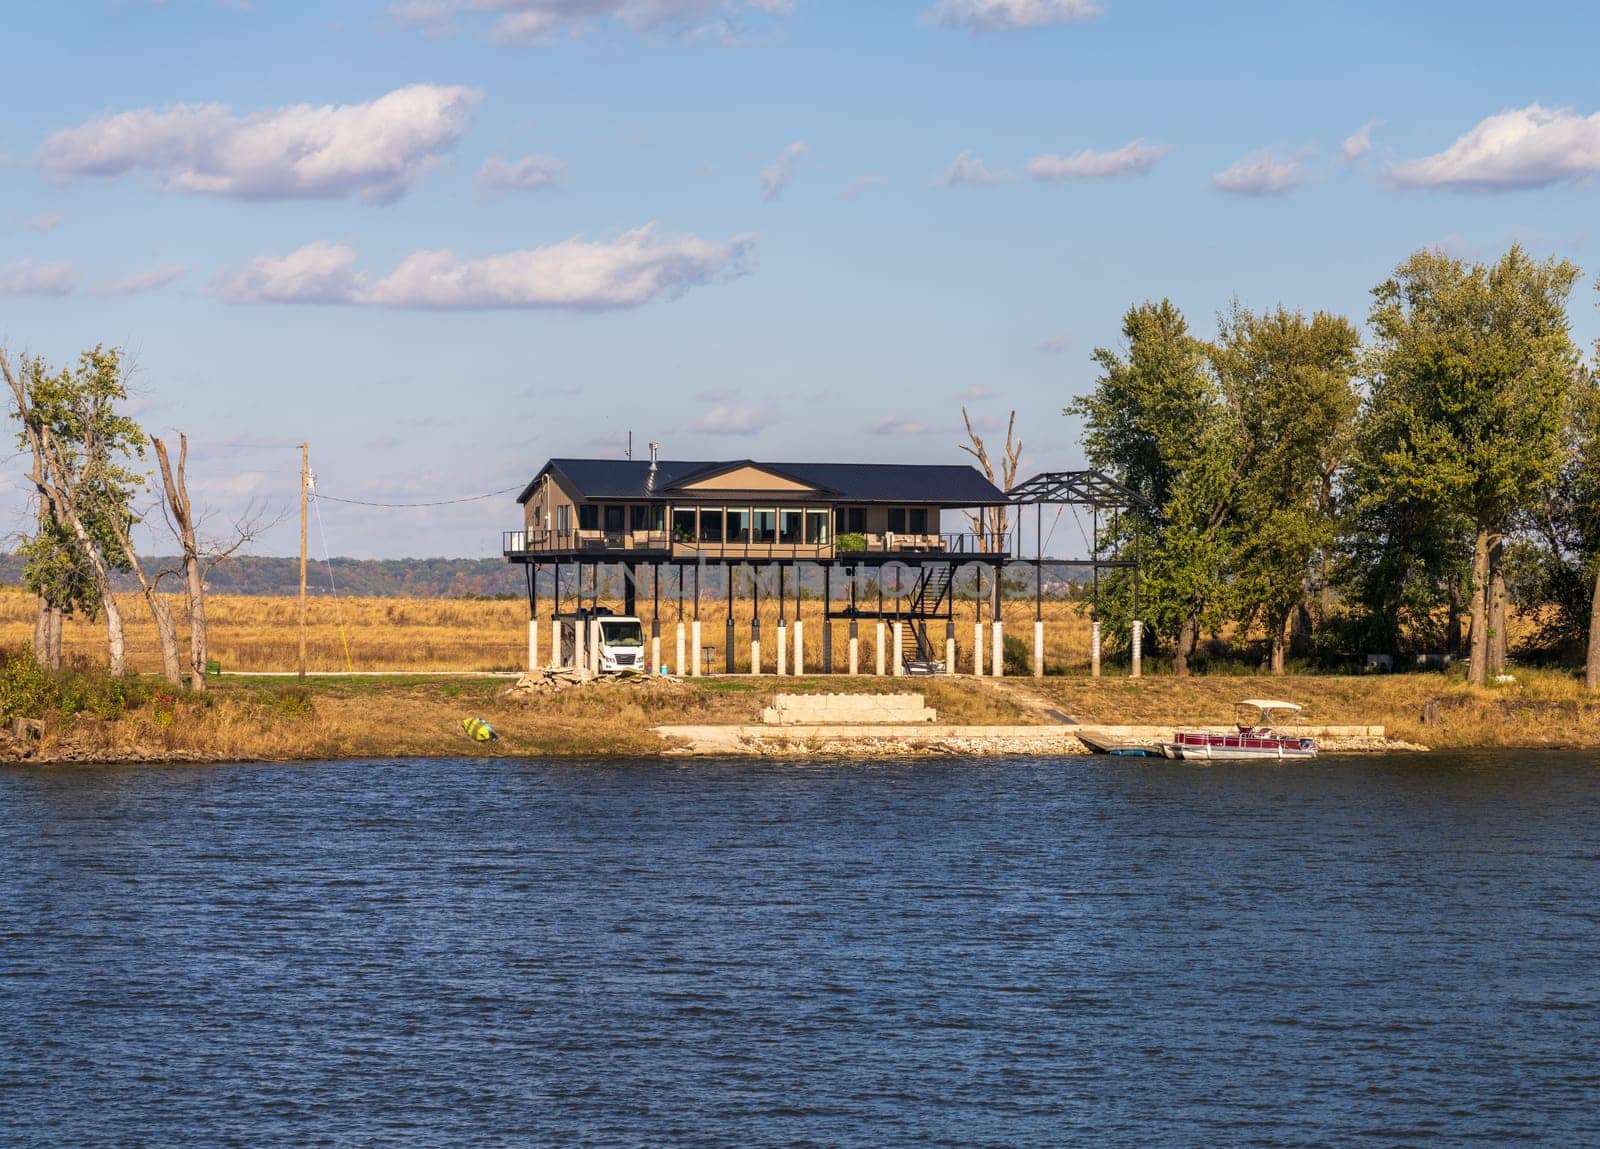 Modern home on very tall structure of stilts by the Mississippi river to protect against high water and floods